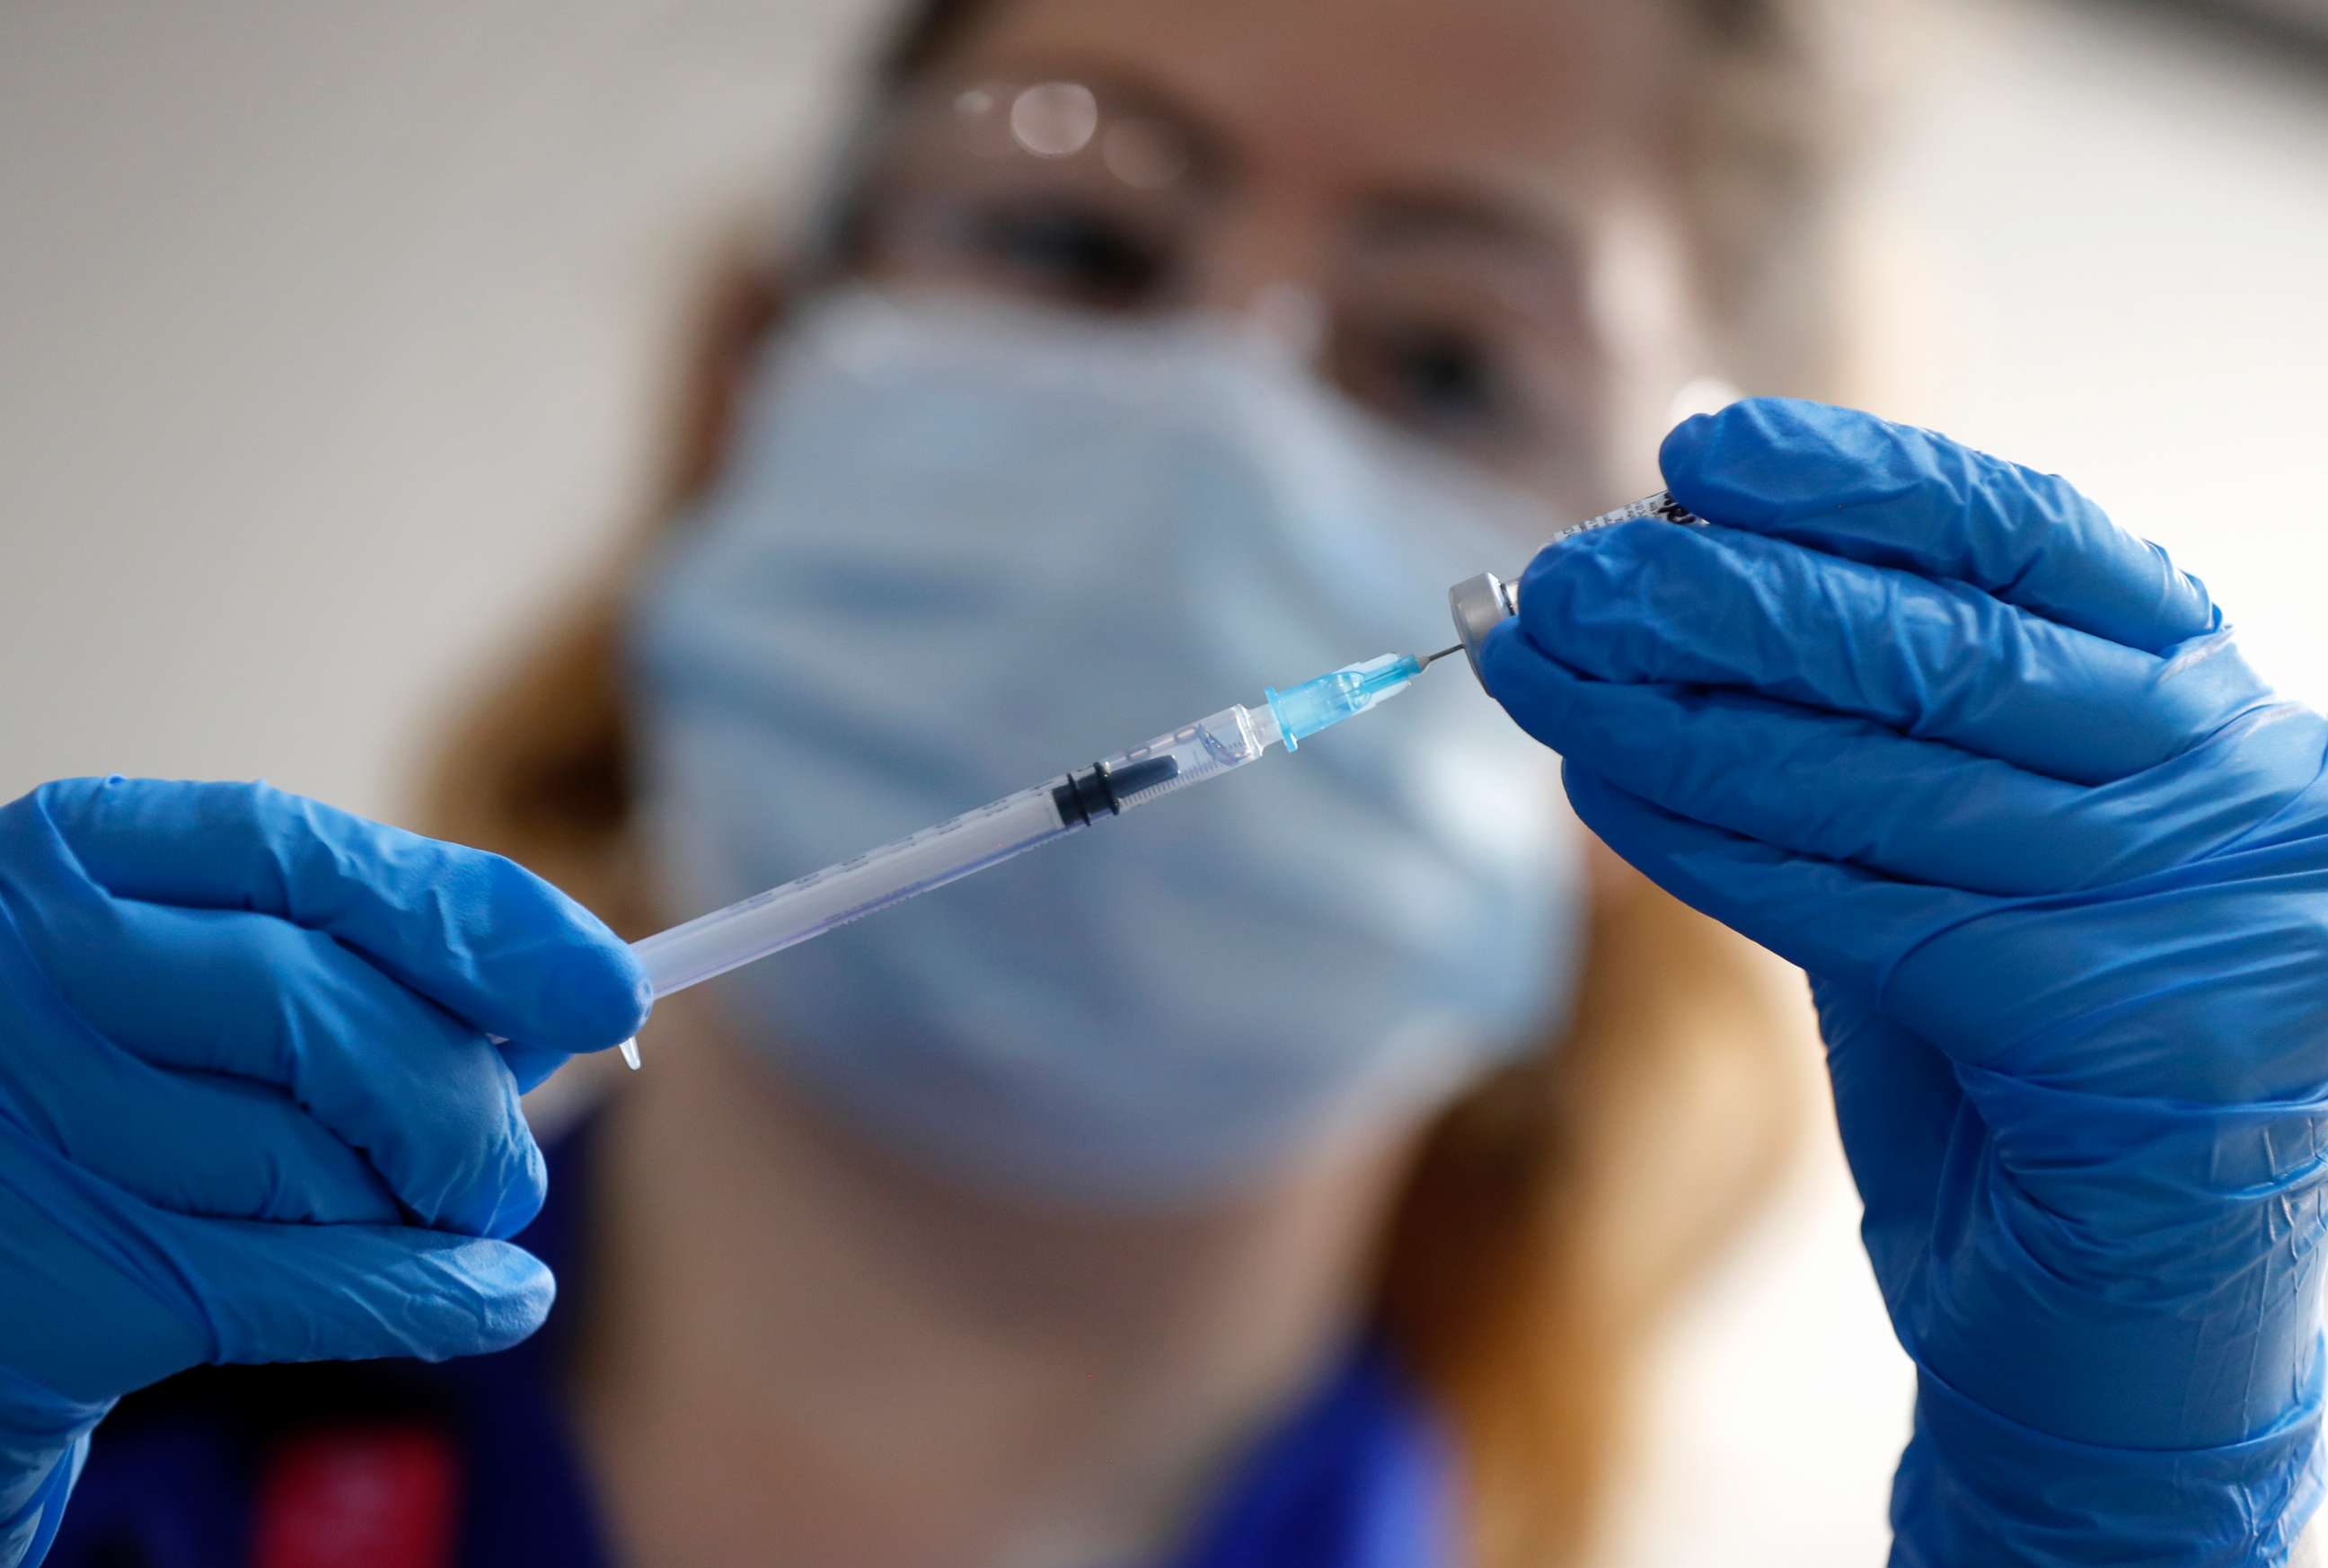 PHOTO: A nurse prepares a shot of the Pfizer-BioNTech COVID-19 vaccine at Guy's Hospital in London, Dec. 8, 2020, as the U.K. health authorities rolled out a national mass vaccination program.